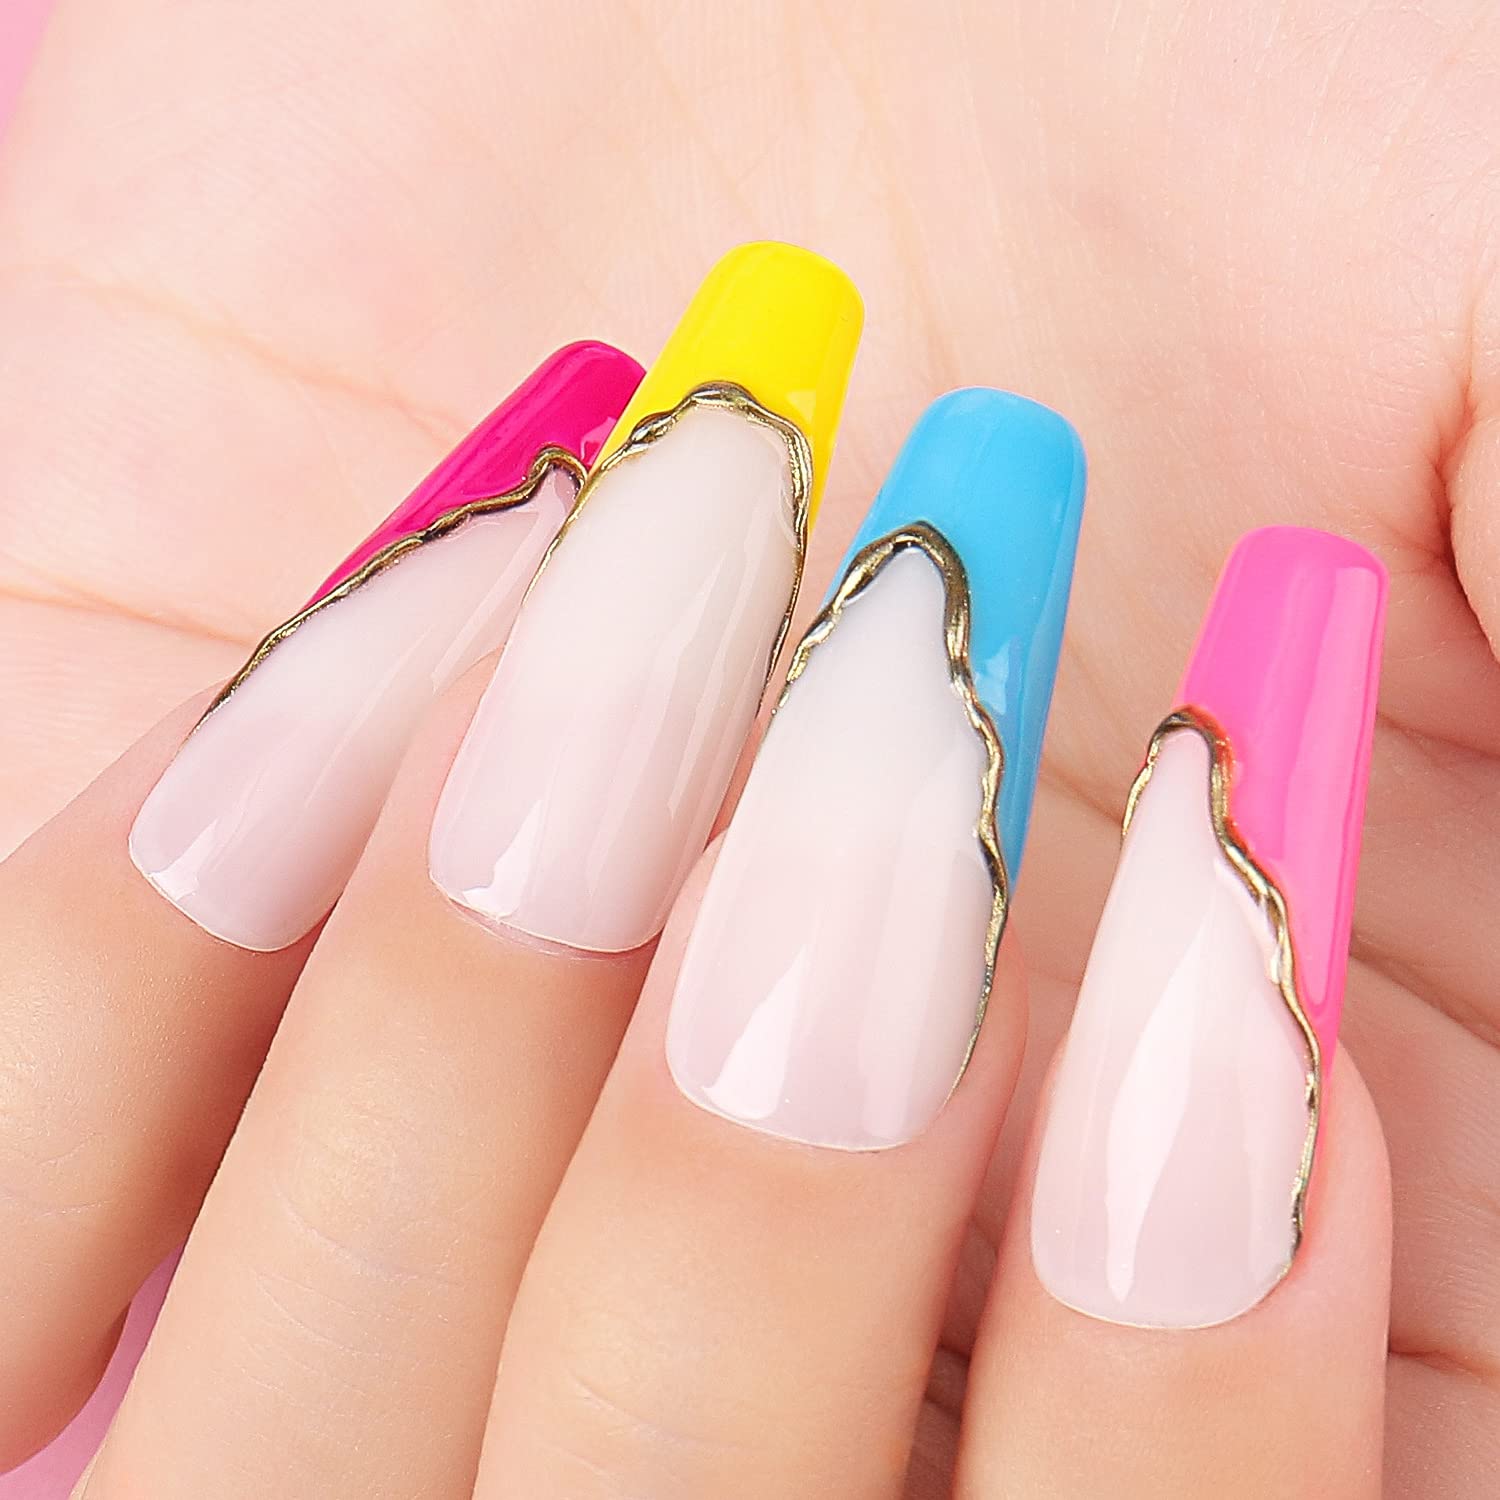 Nail Brush in Delhi at best price by Nails Mantra Salon and Academy -  Justdial